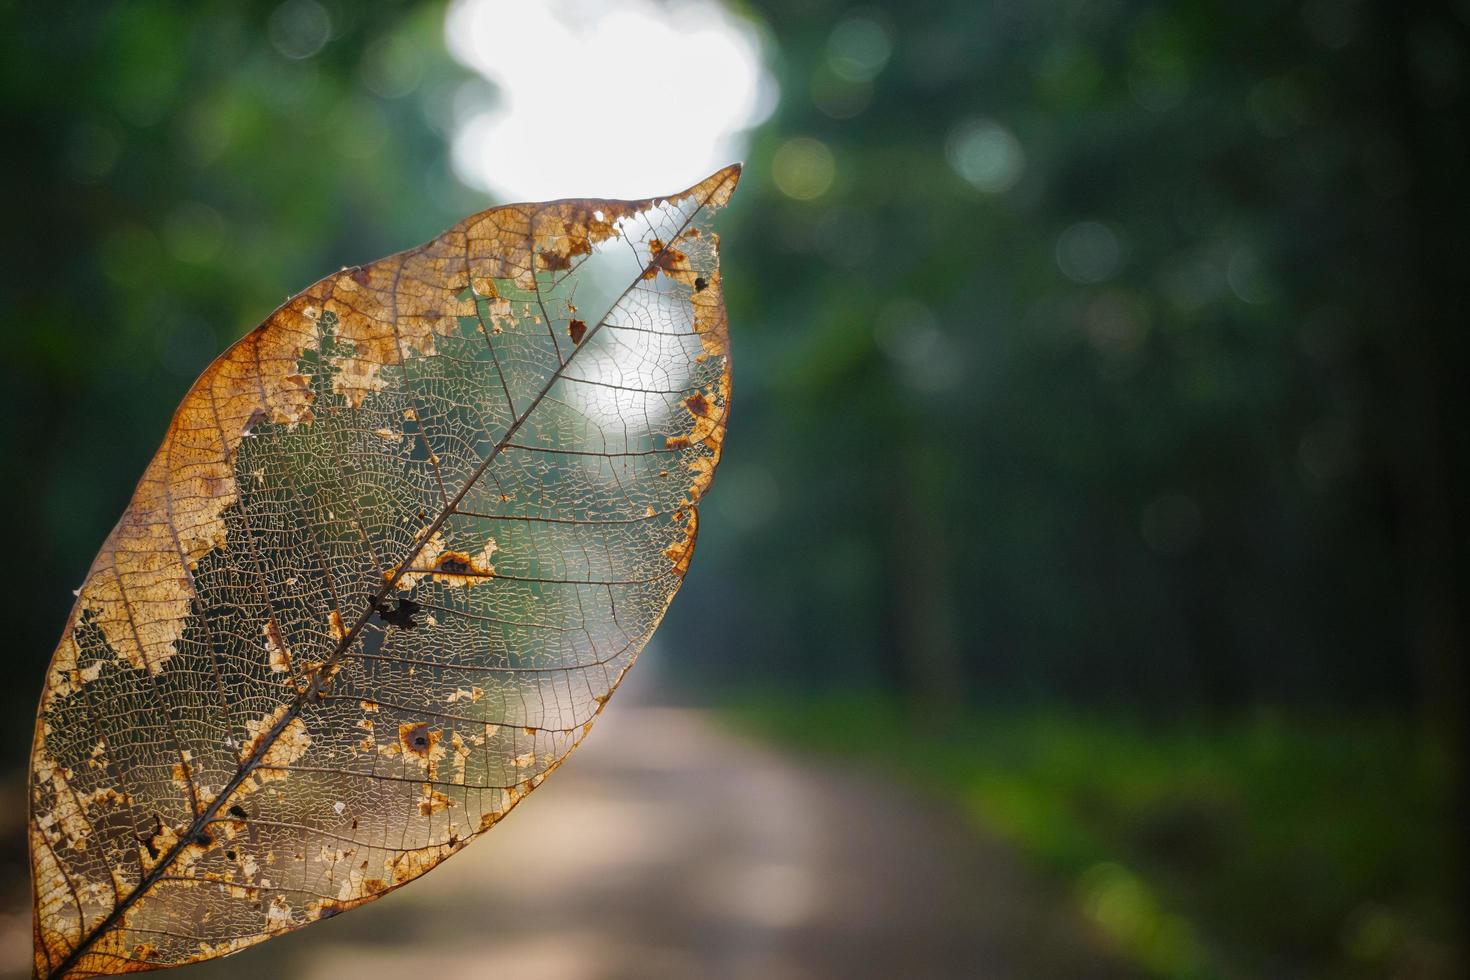 Dry leaf texture and nature background. Surface of brown leaves material, closeup with blurred scene Free Photo